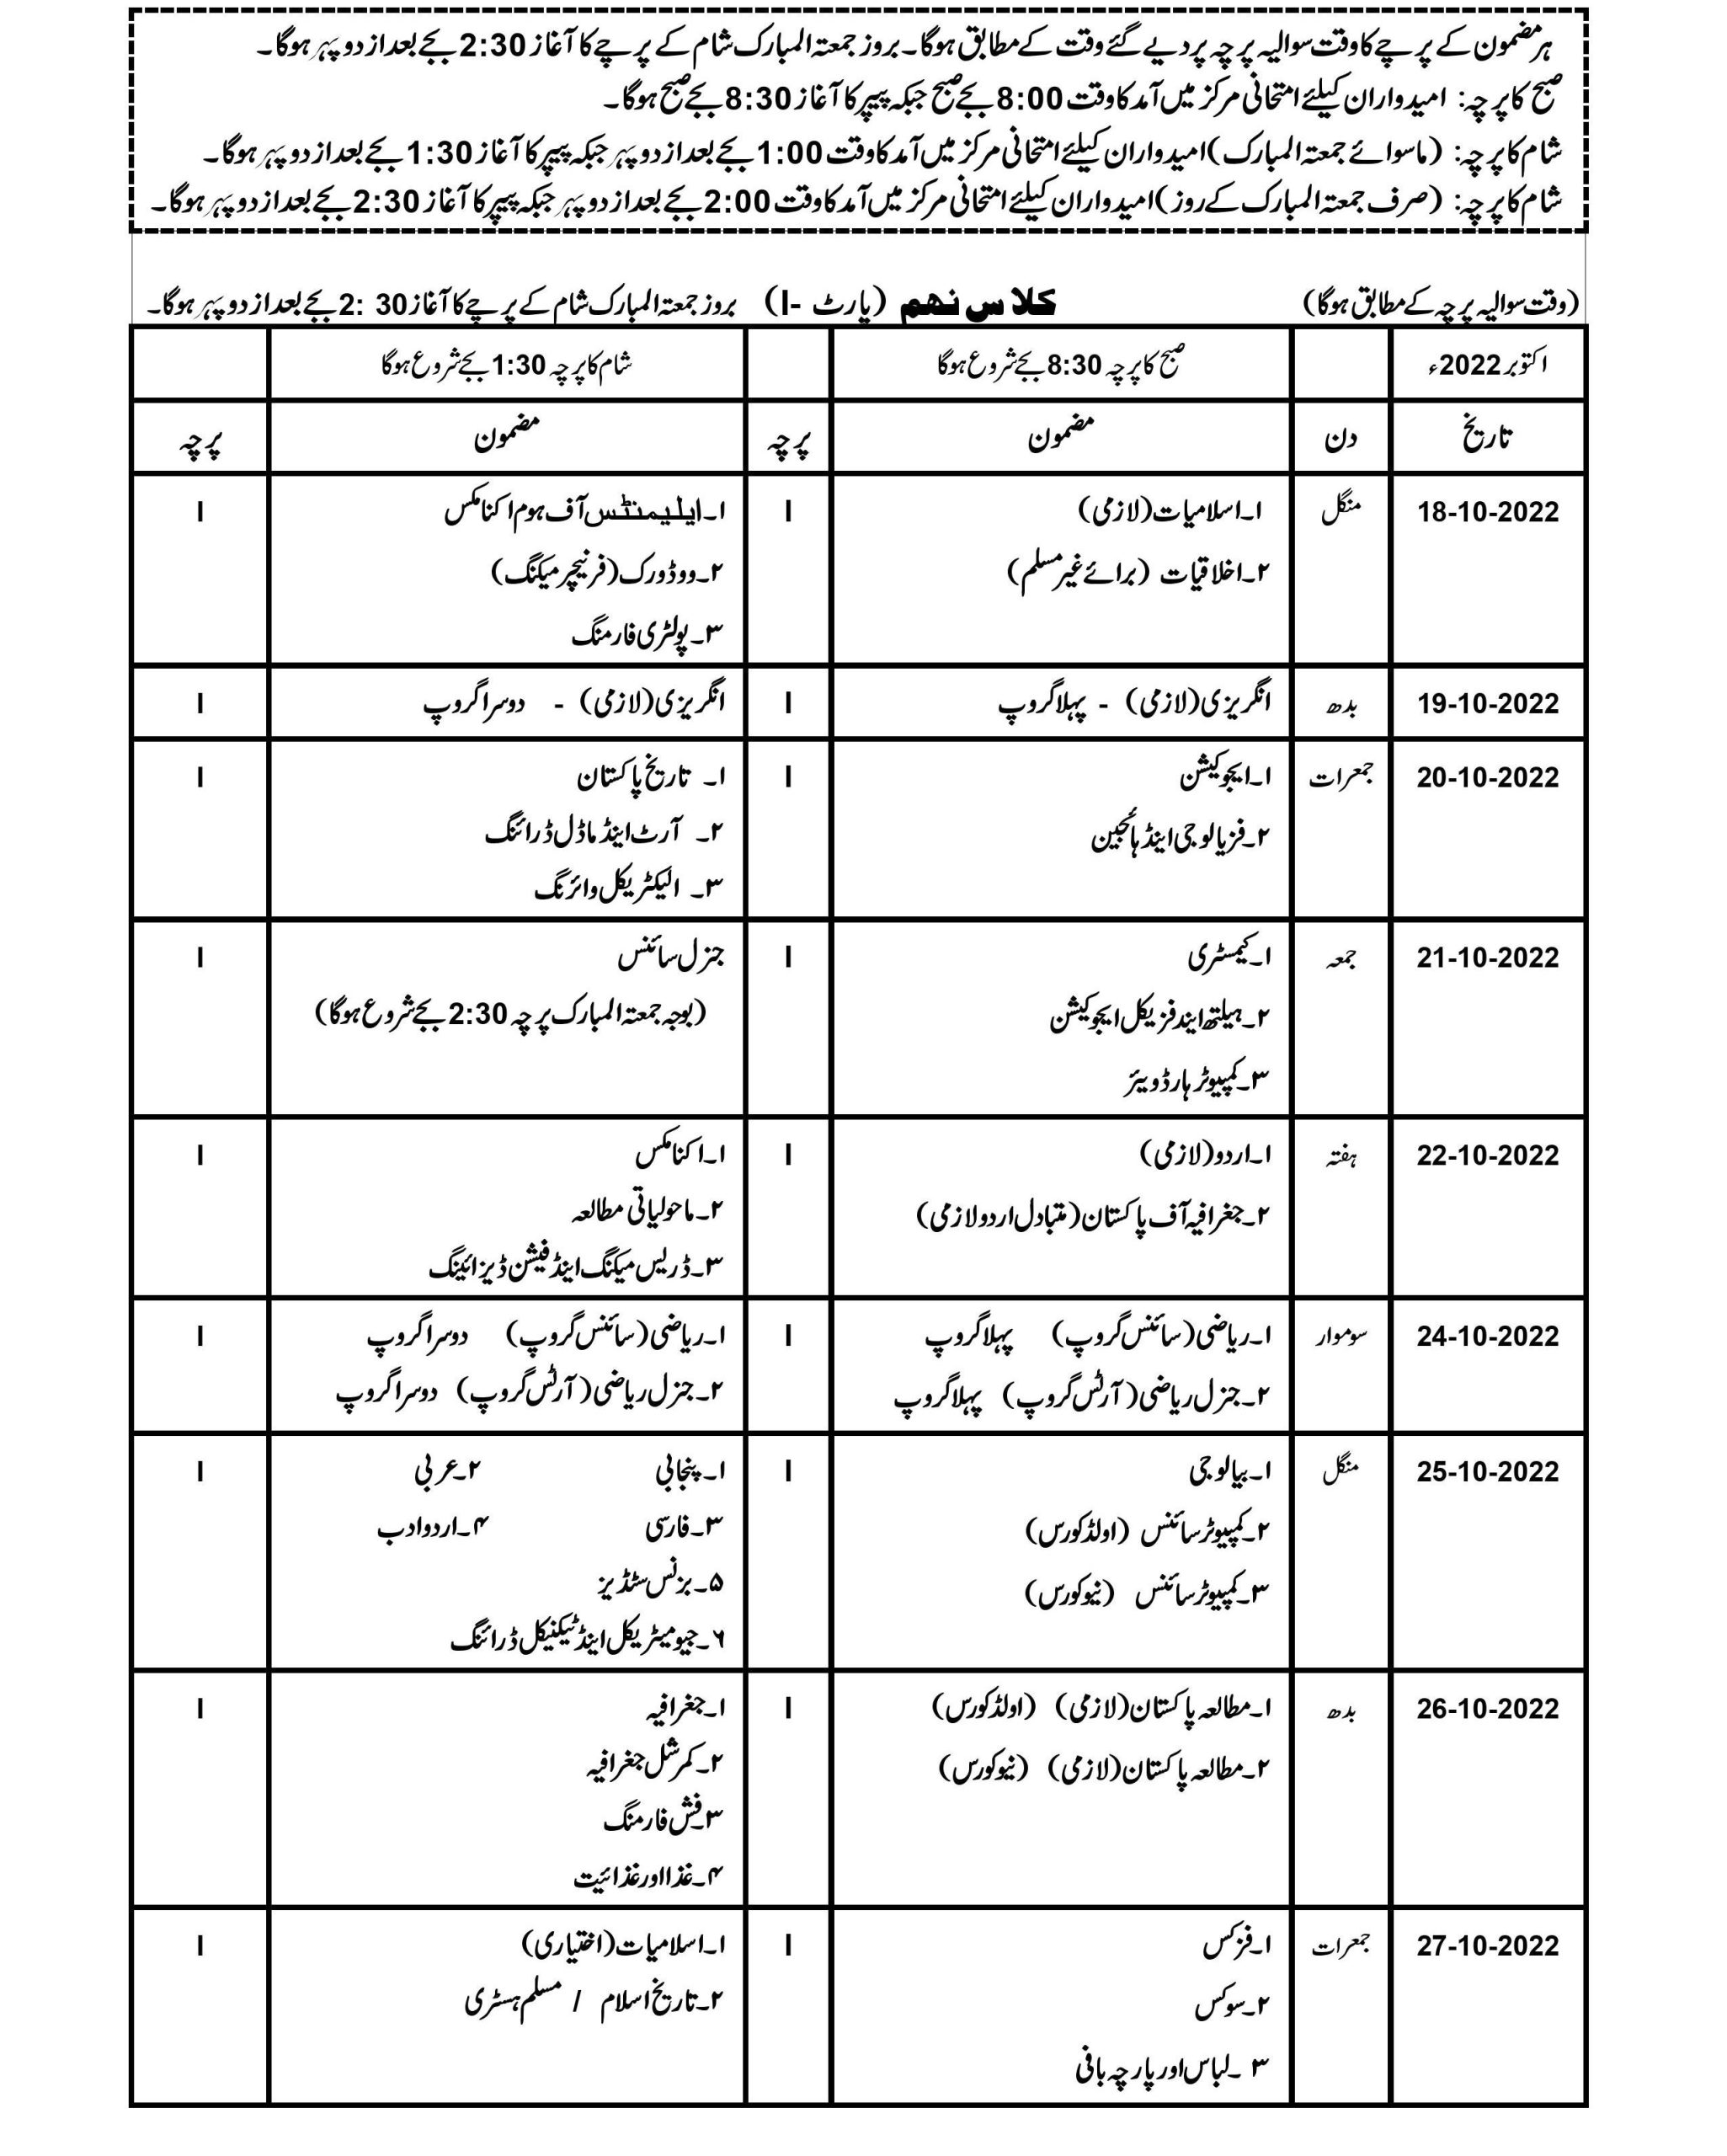 Download BISE Gujranwala 9th Supply Date Sheet 2022